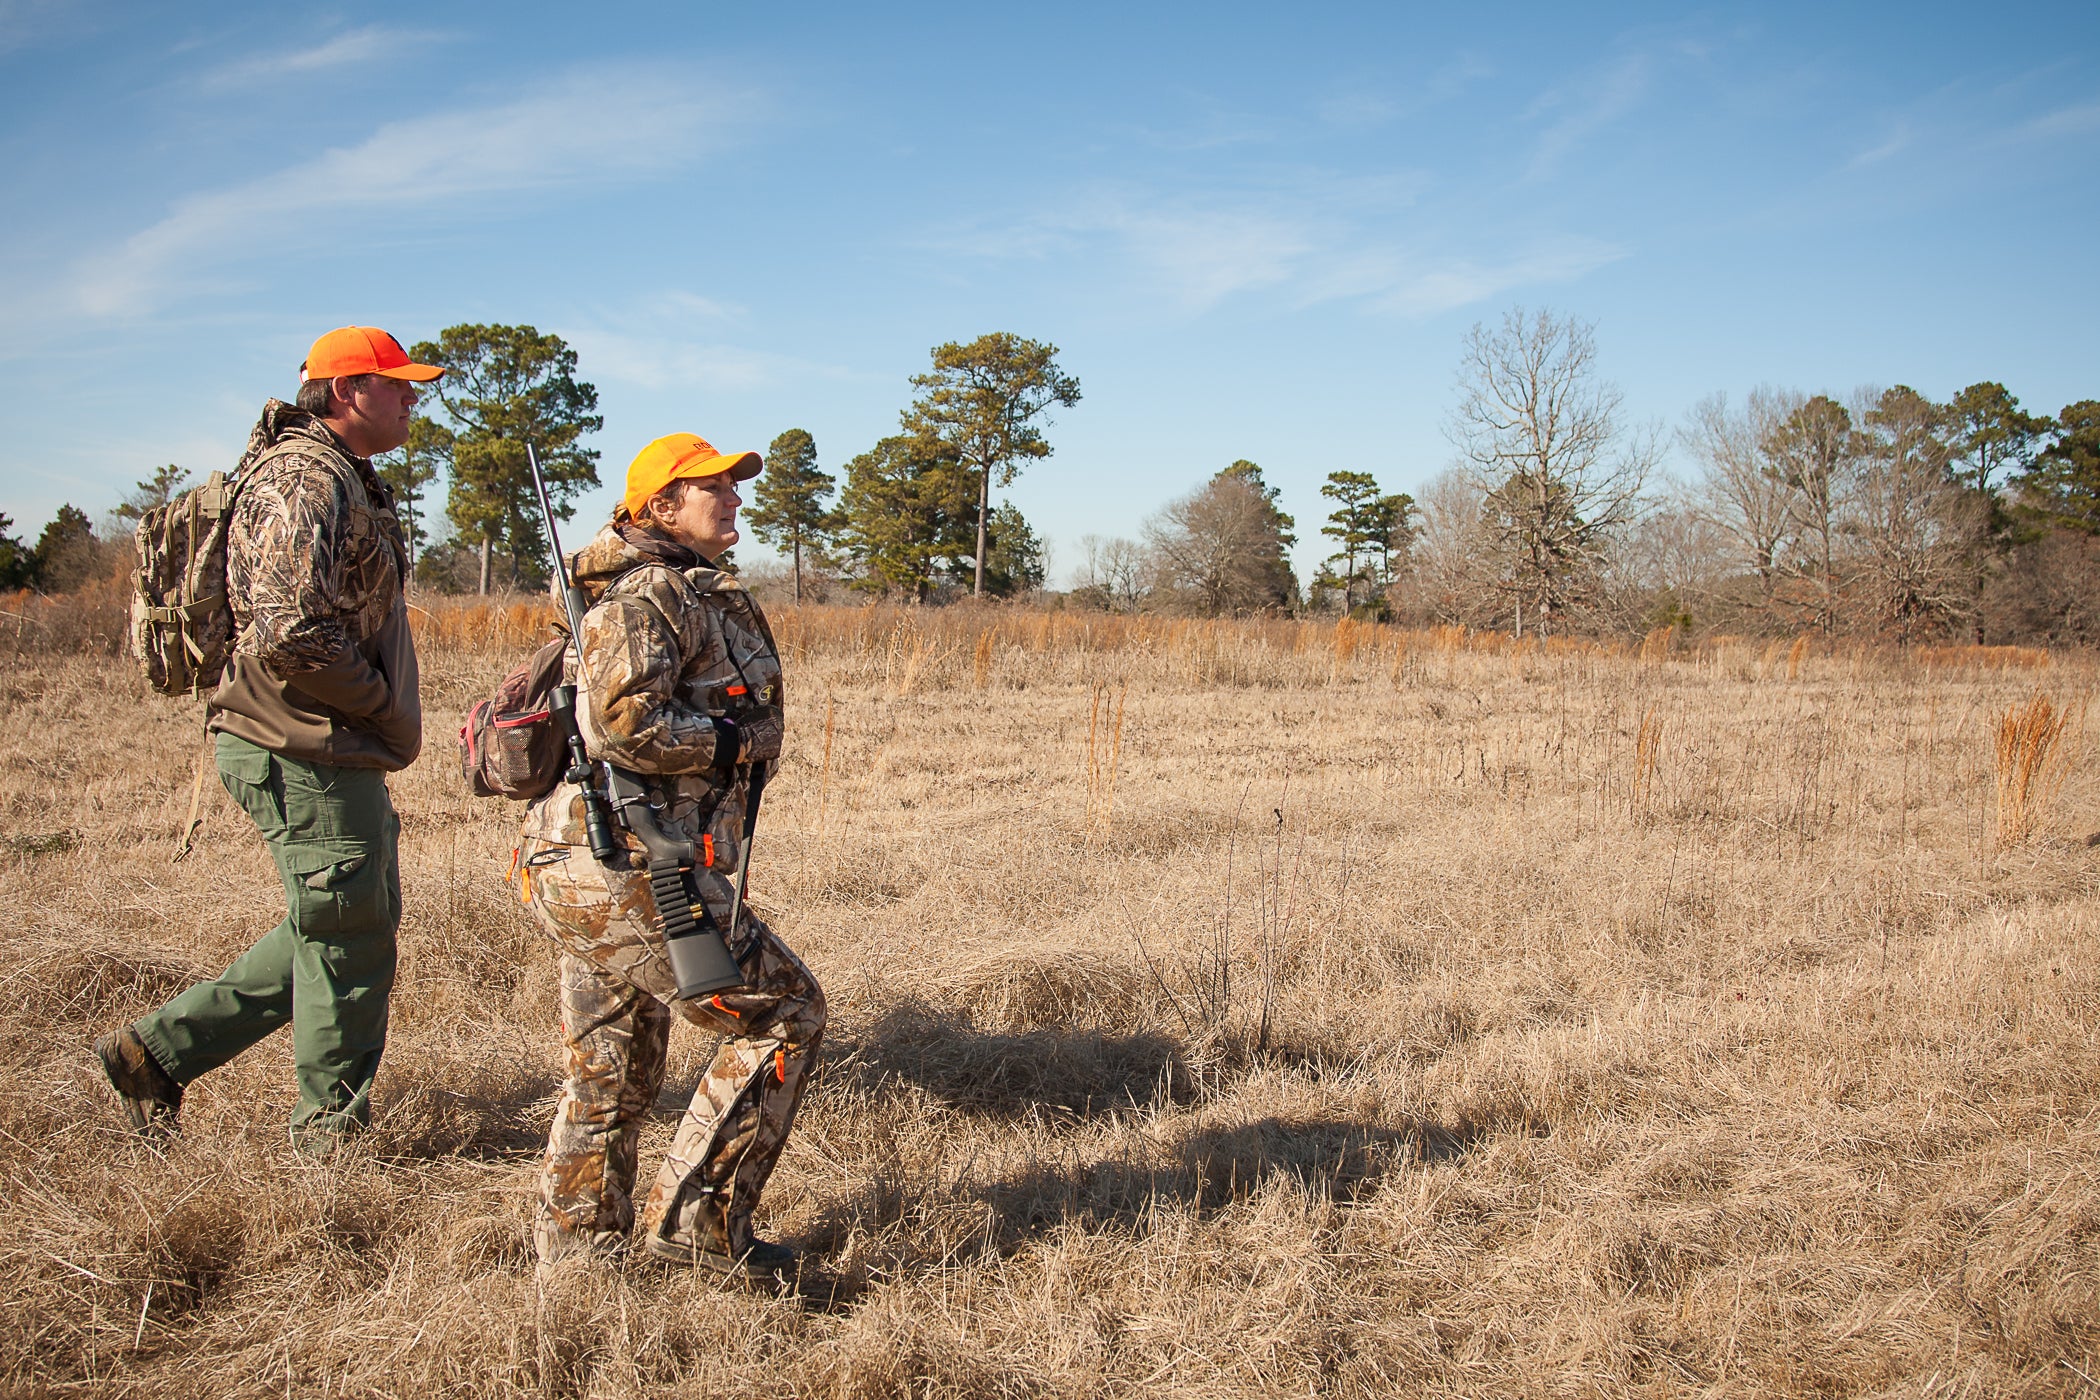 Attending Hunting 101 is required to become eligible to participate in a three-day AMH hunt for deer.